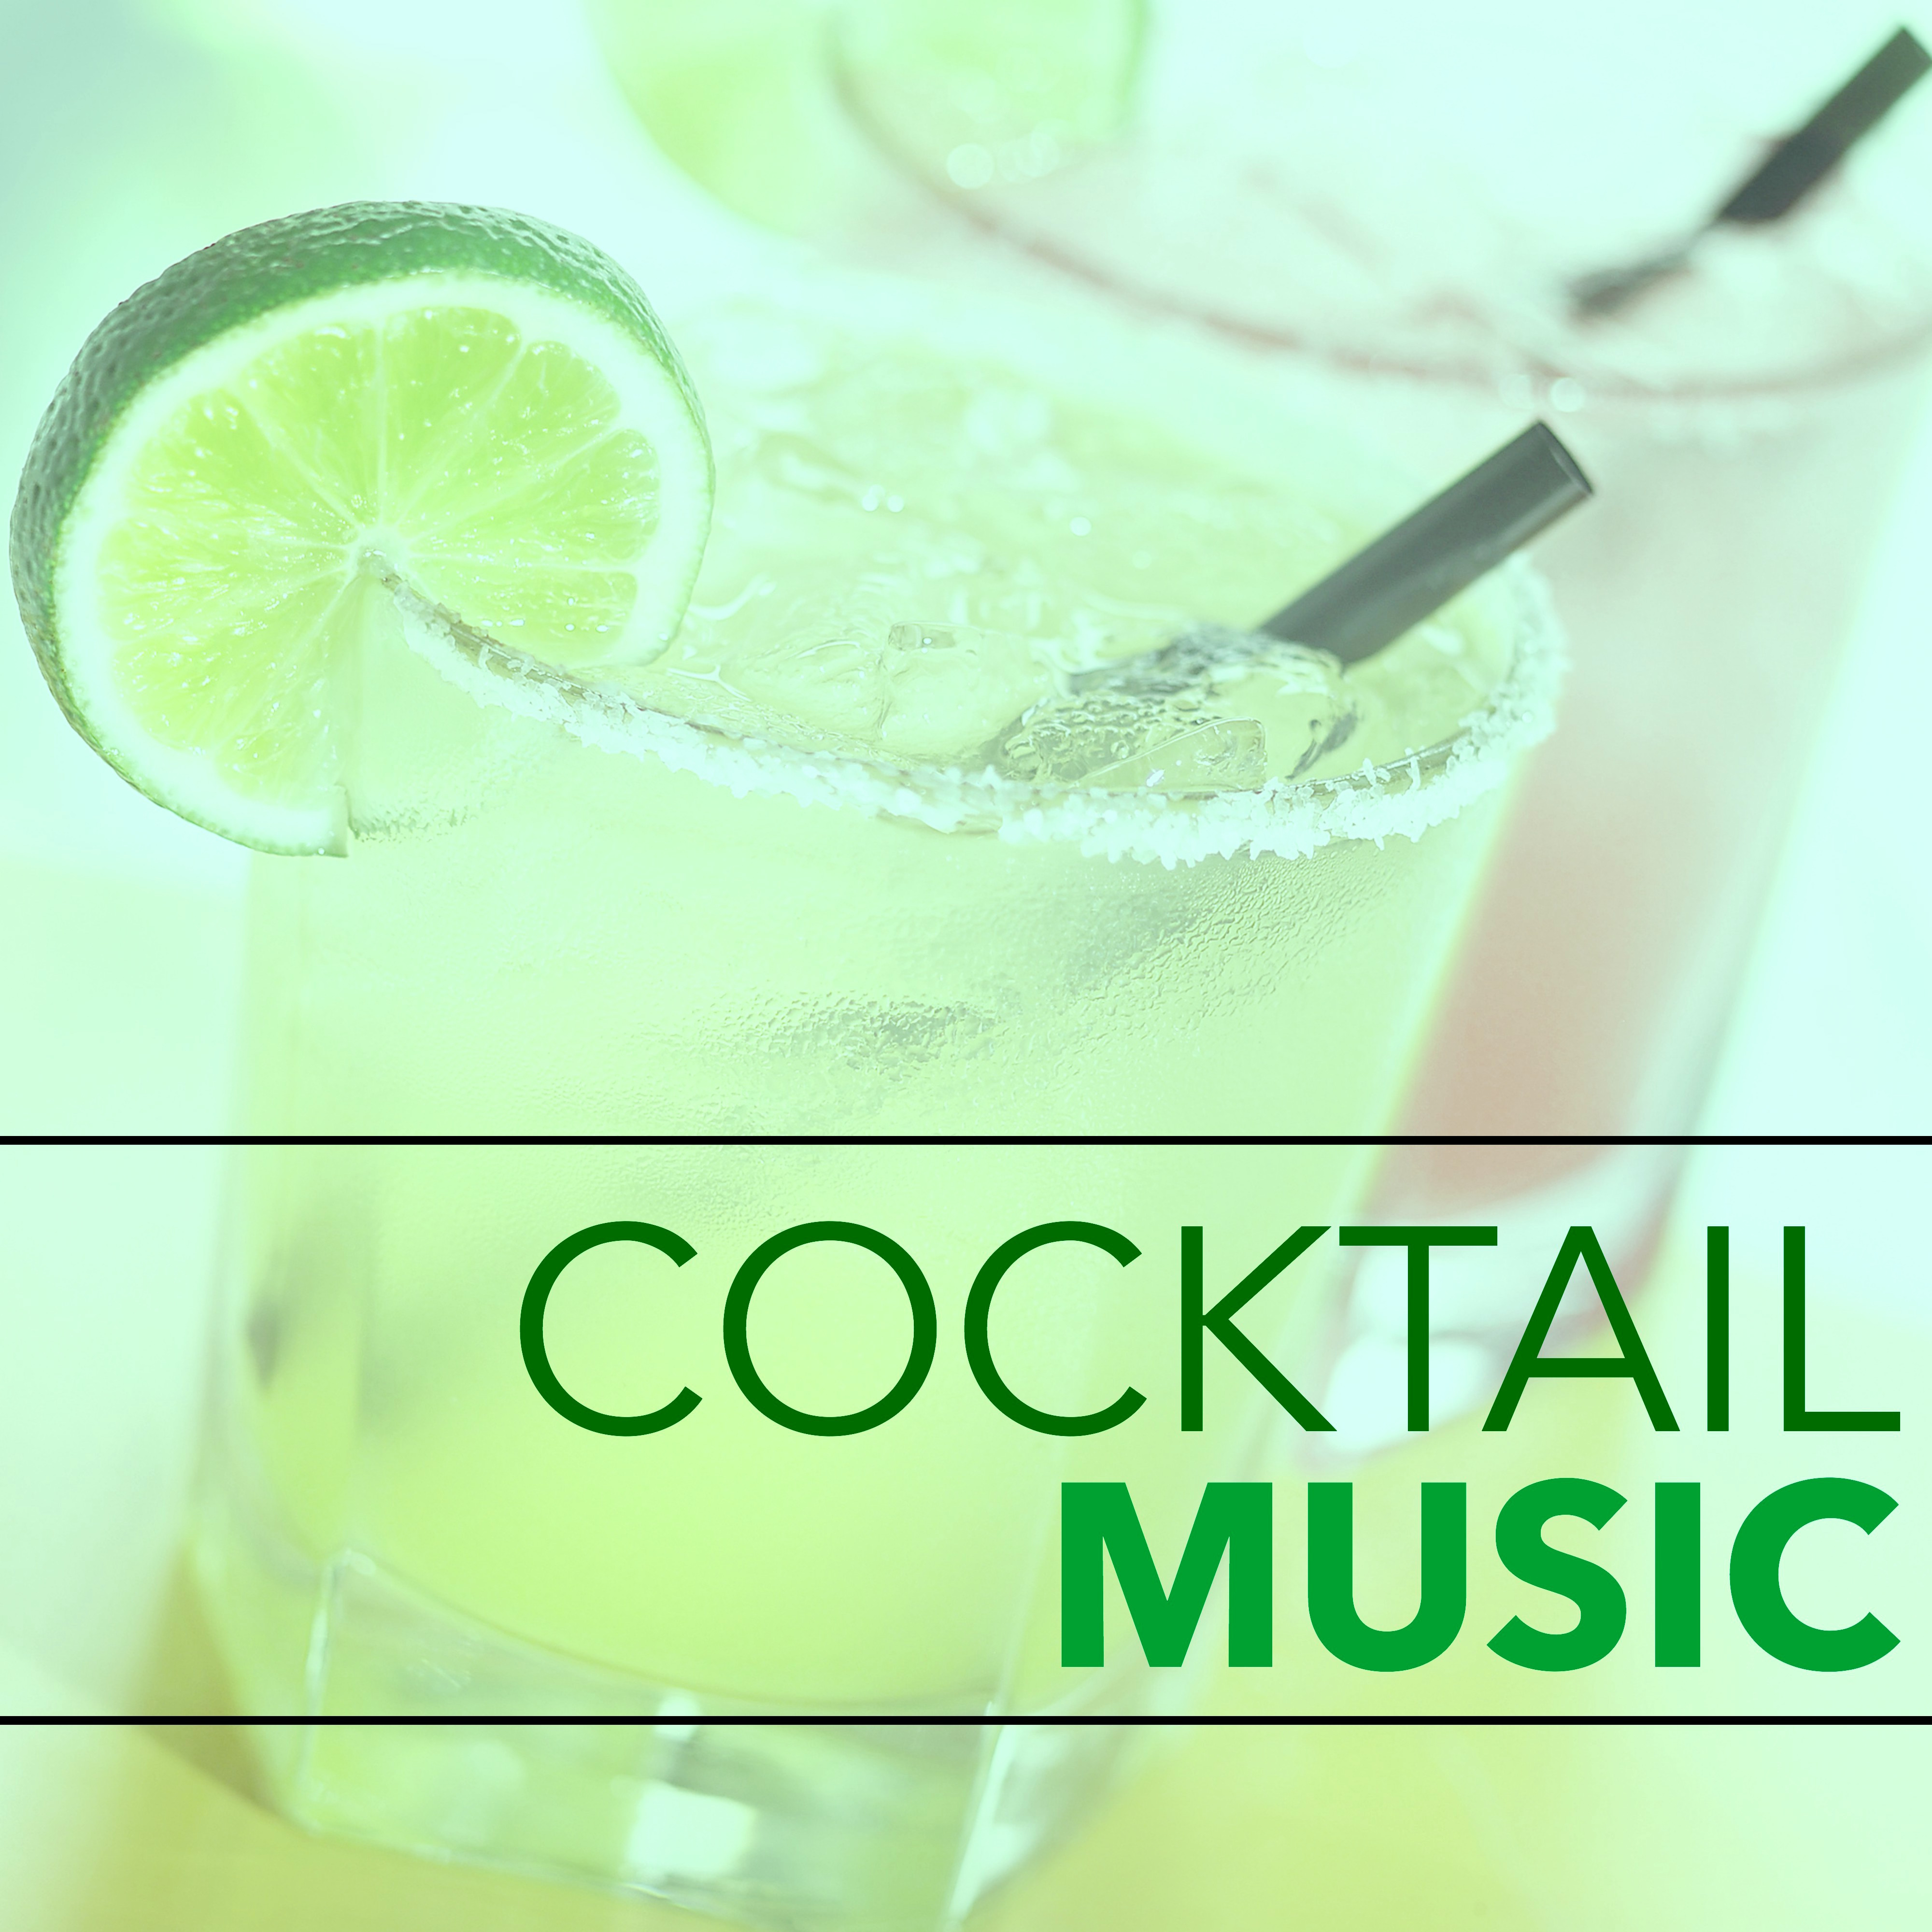 Cocktail Music  Relaxing Jazz Music for Drinks and Dinner, Piano Sax and Guitar Smooth Jazz Songs